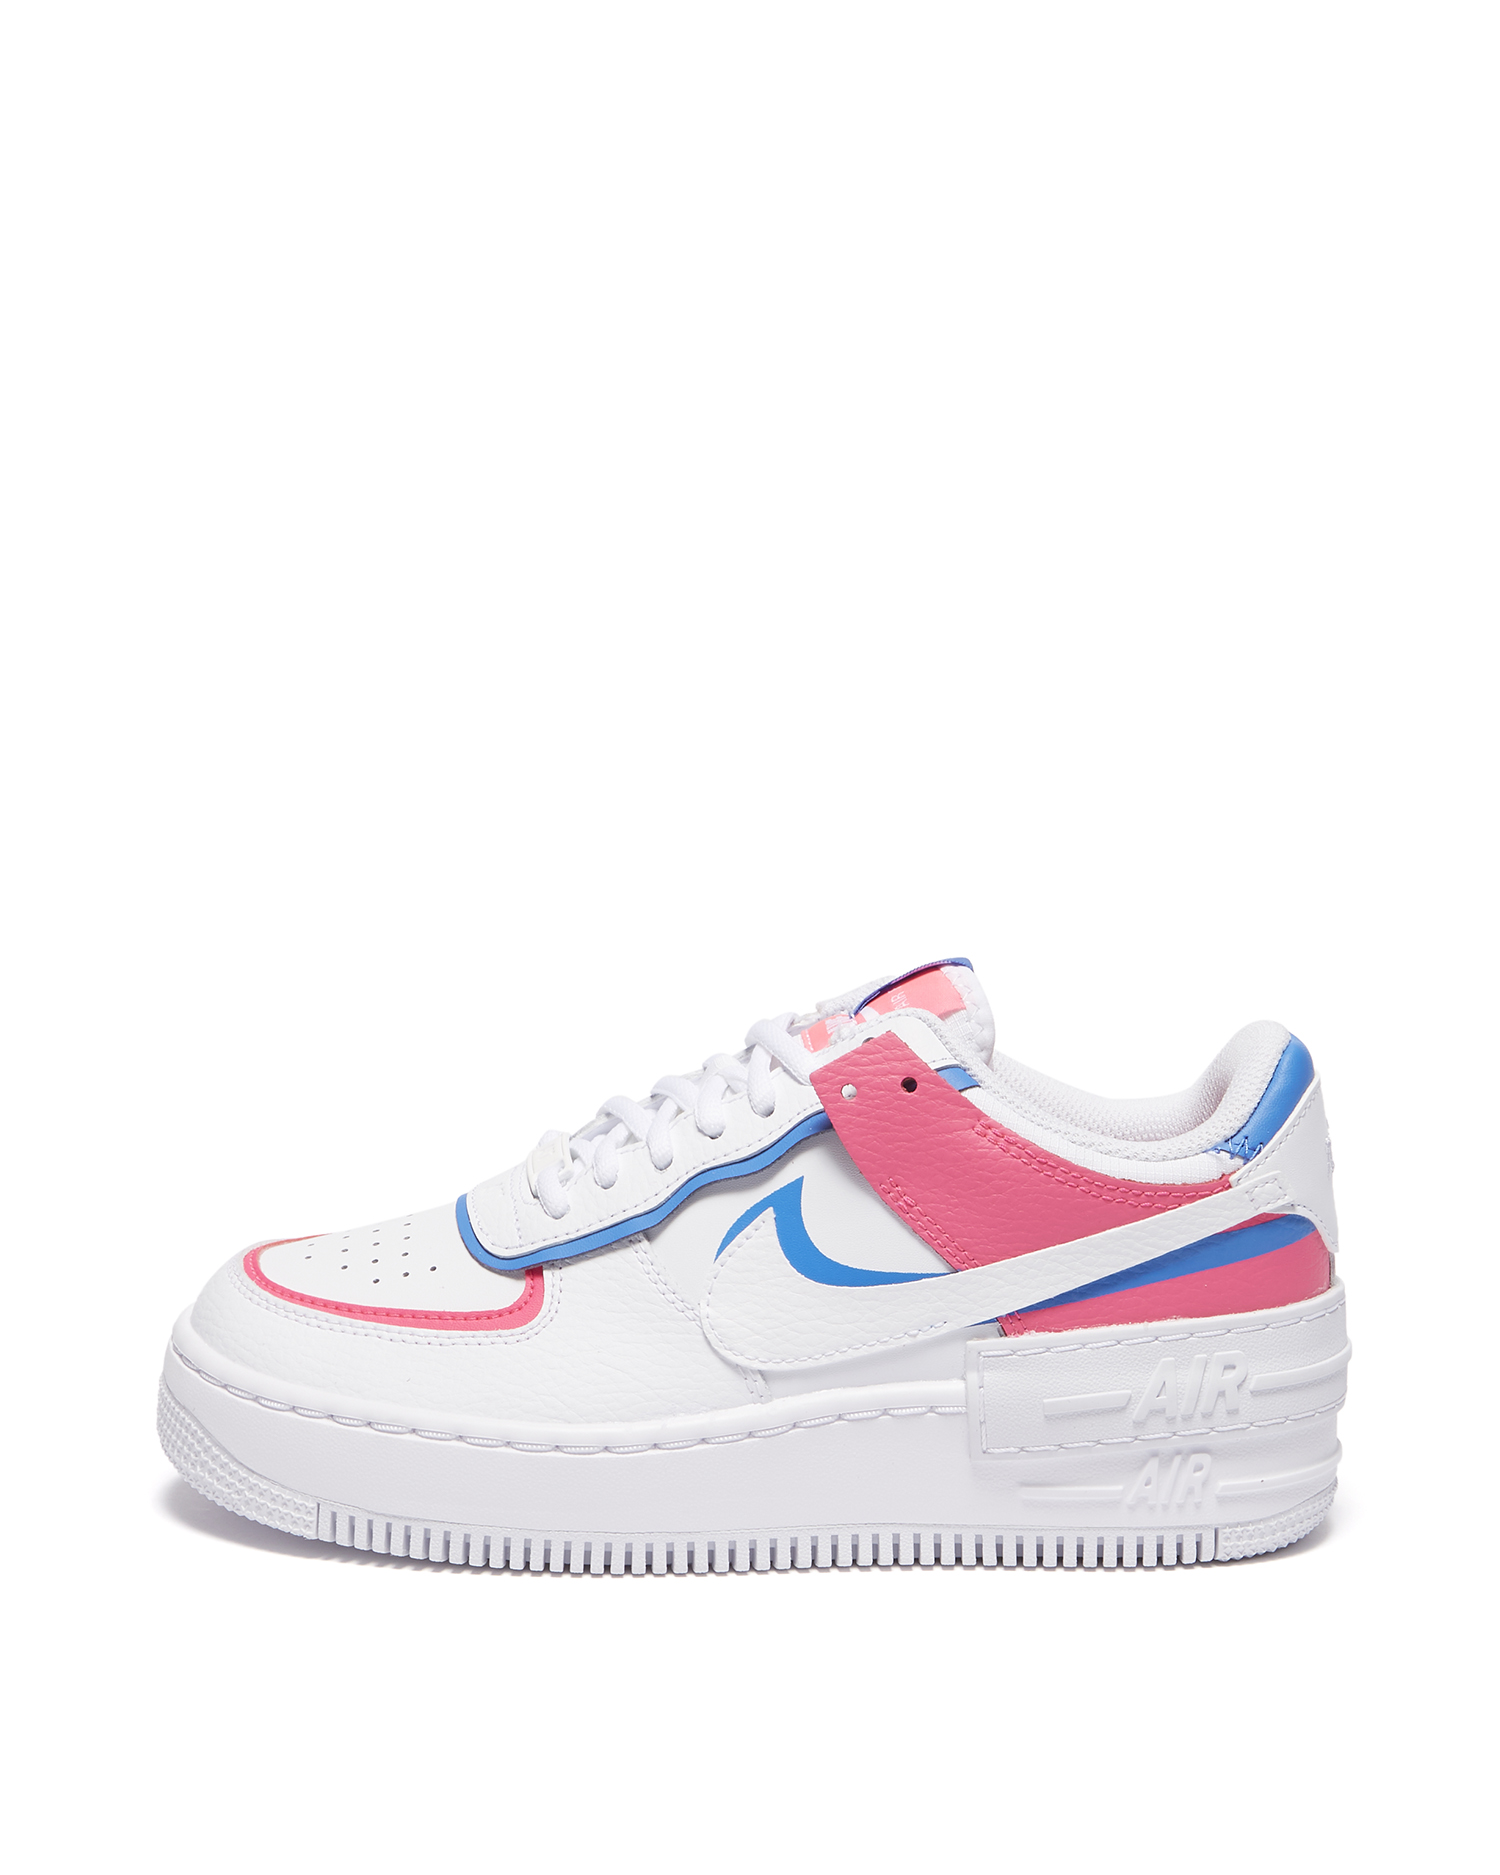 places that sell air force 1